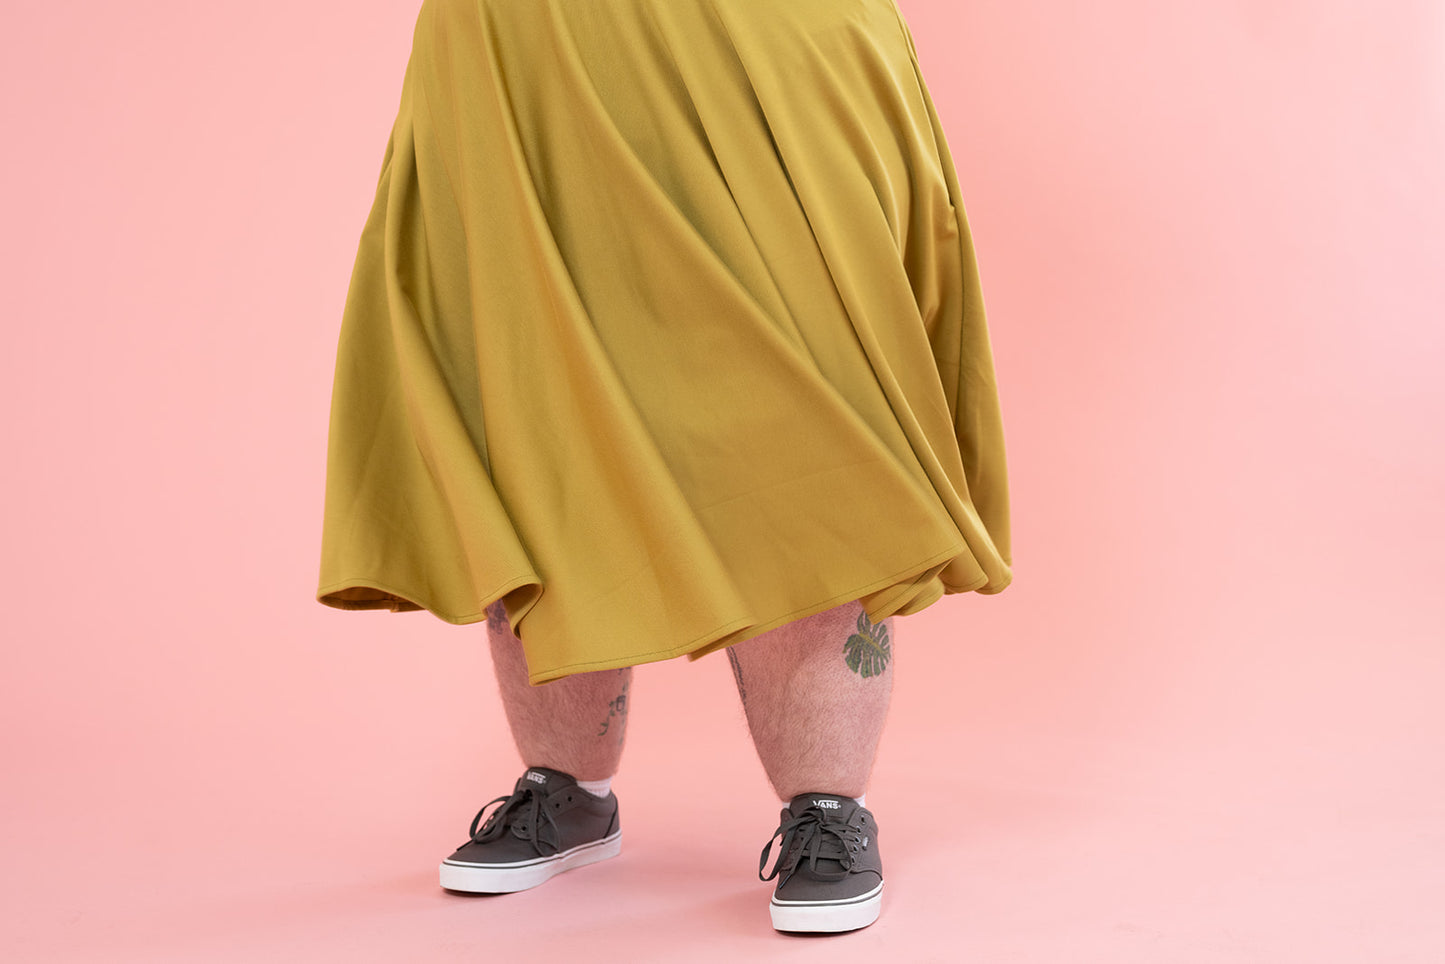 Photo of a person wearing a mustard coloured skirt. They have a few tattoos on their legs and are wearing grey sneakers.